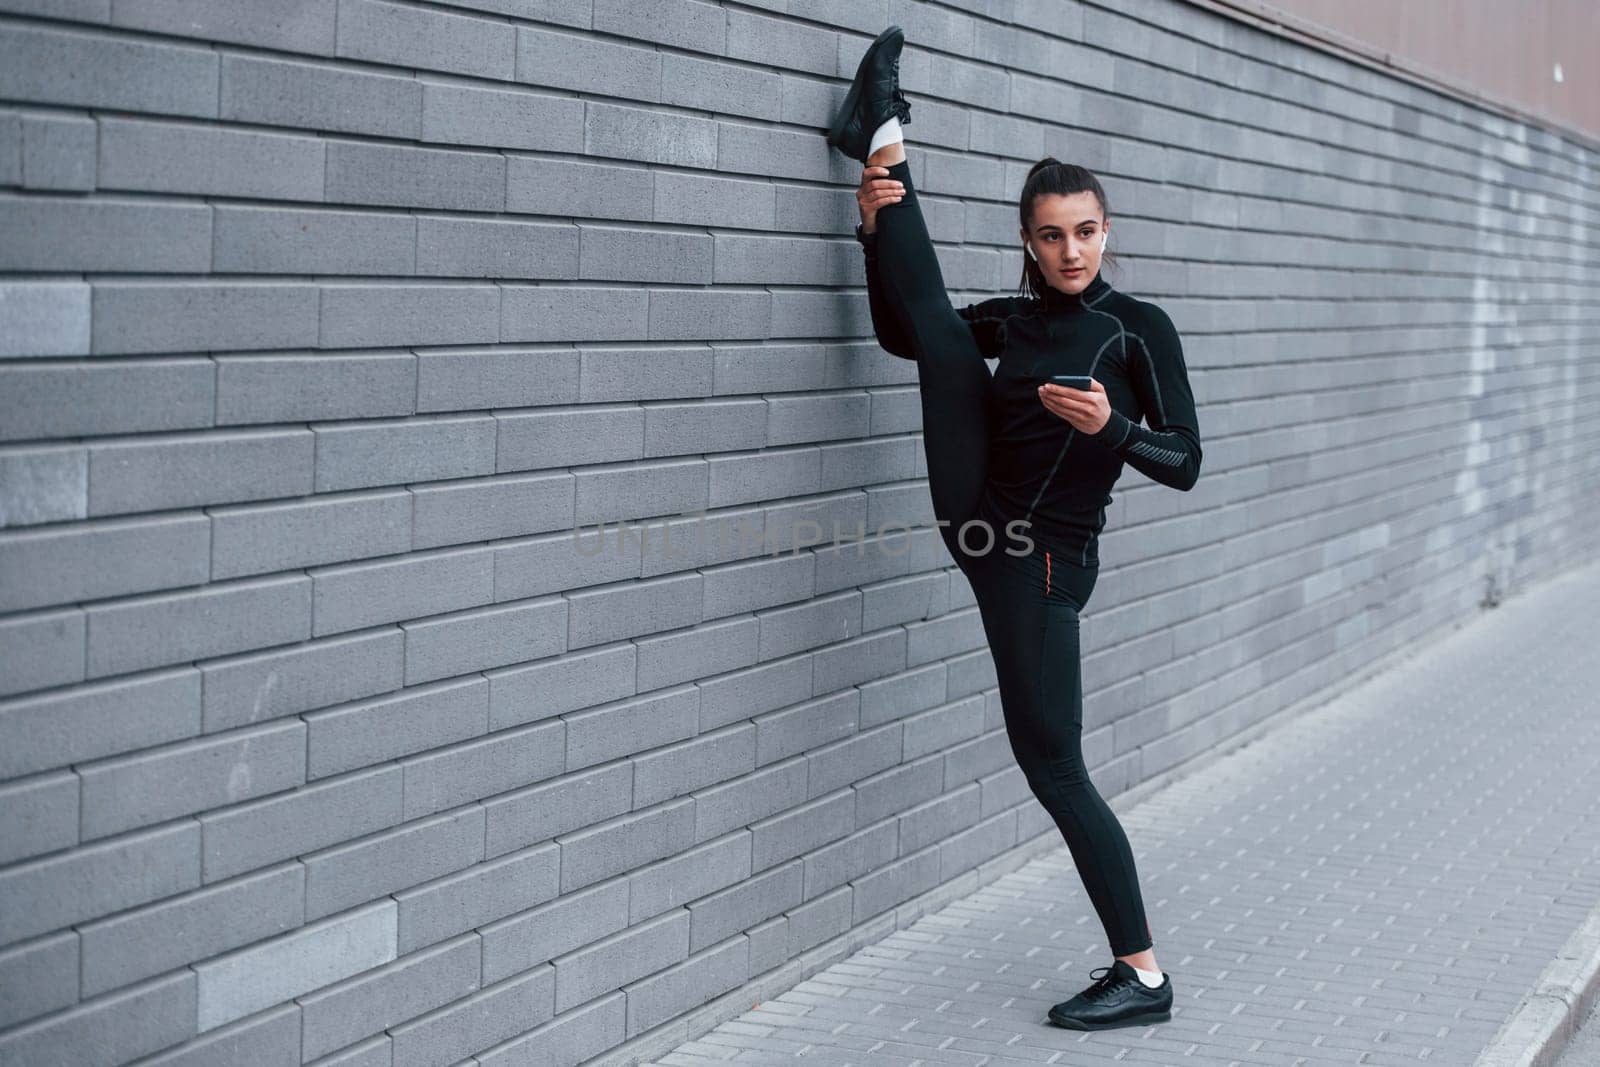 Young sportive girl with phone in black sportswear doing legs stretching outdoors by using gray wall.